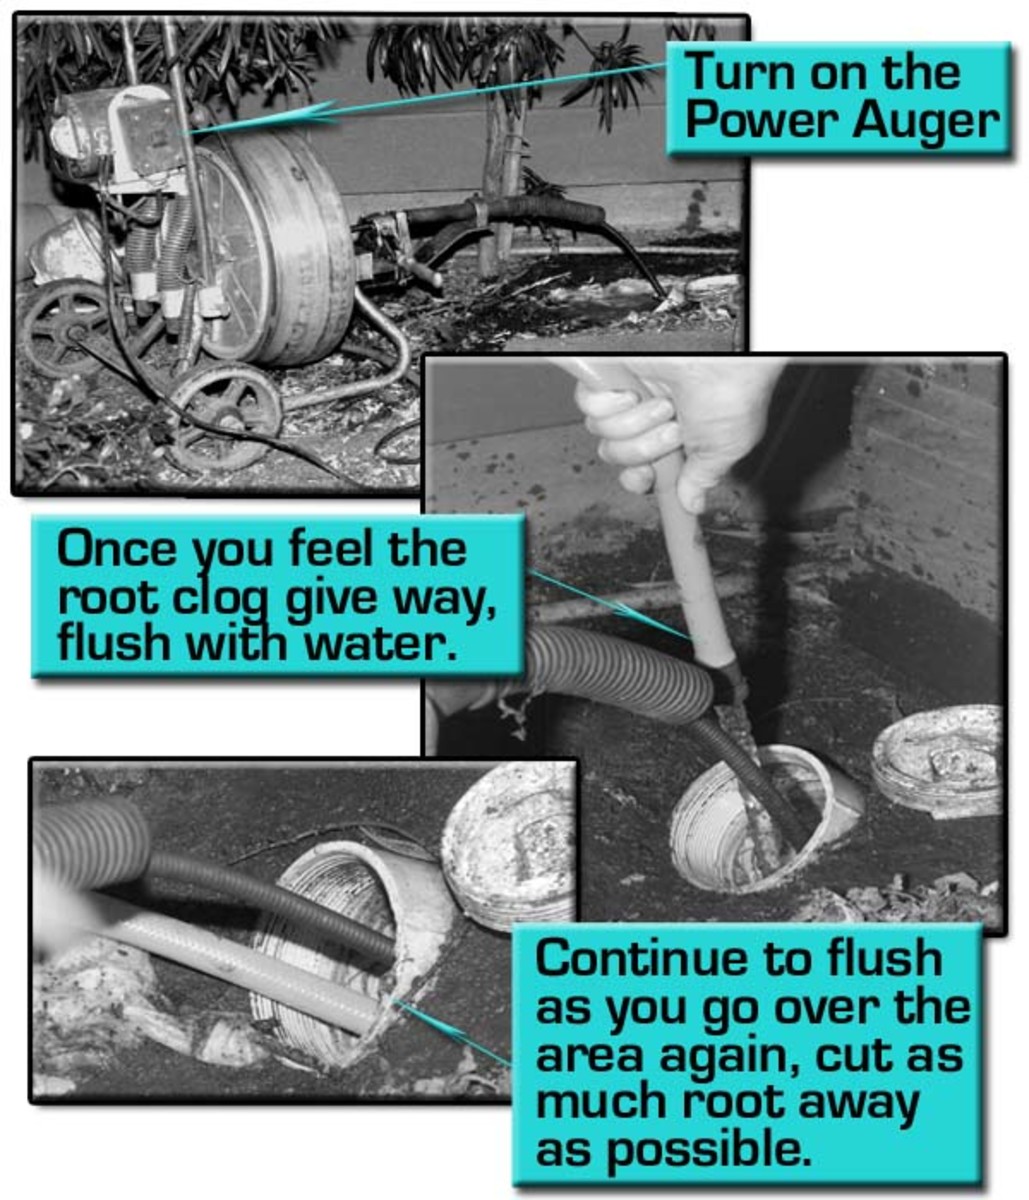 Turn on the Auger and feed cable until you feel the clog clear. Flush with hose water as you go over the area clearing as much of the root away as possible.